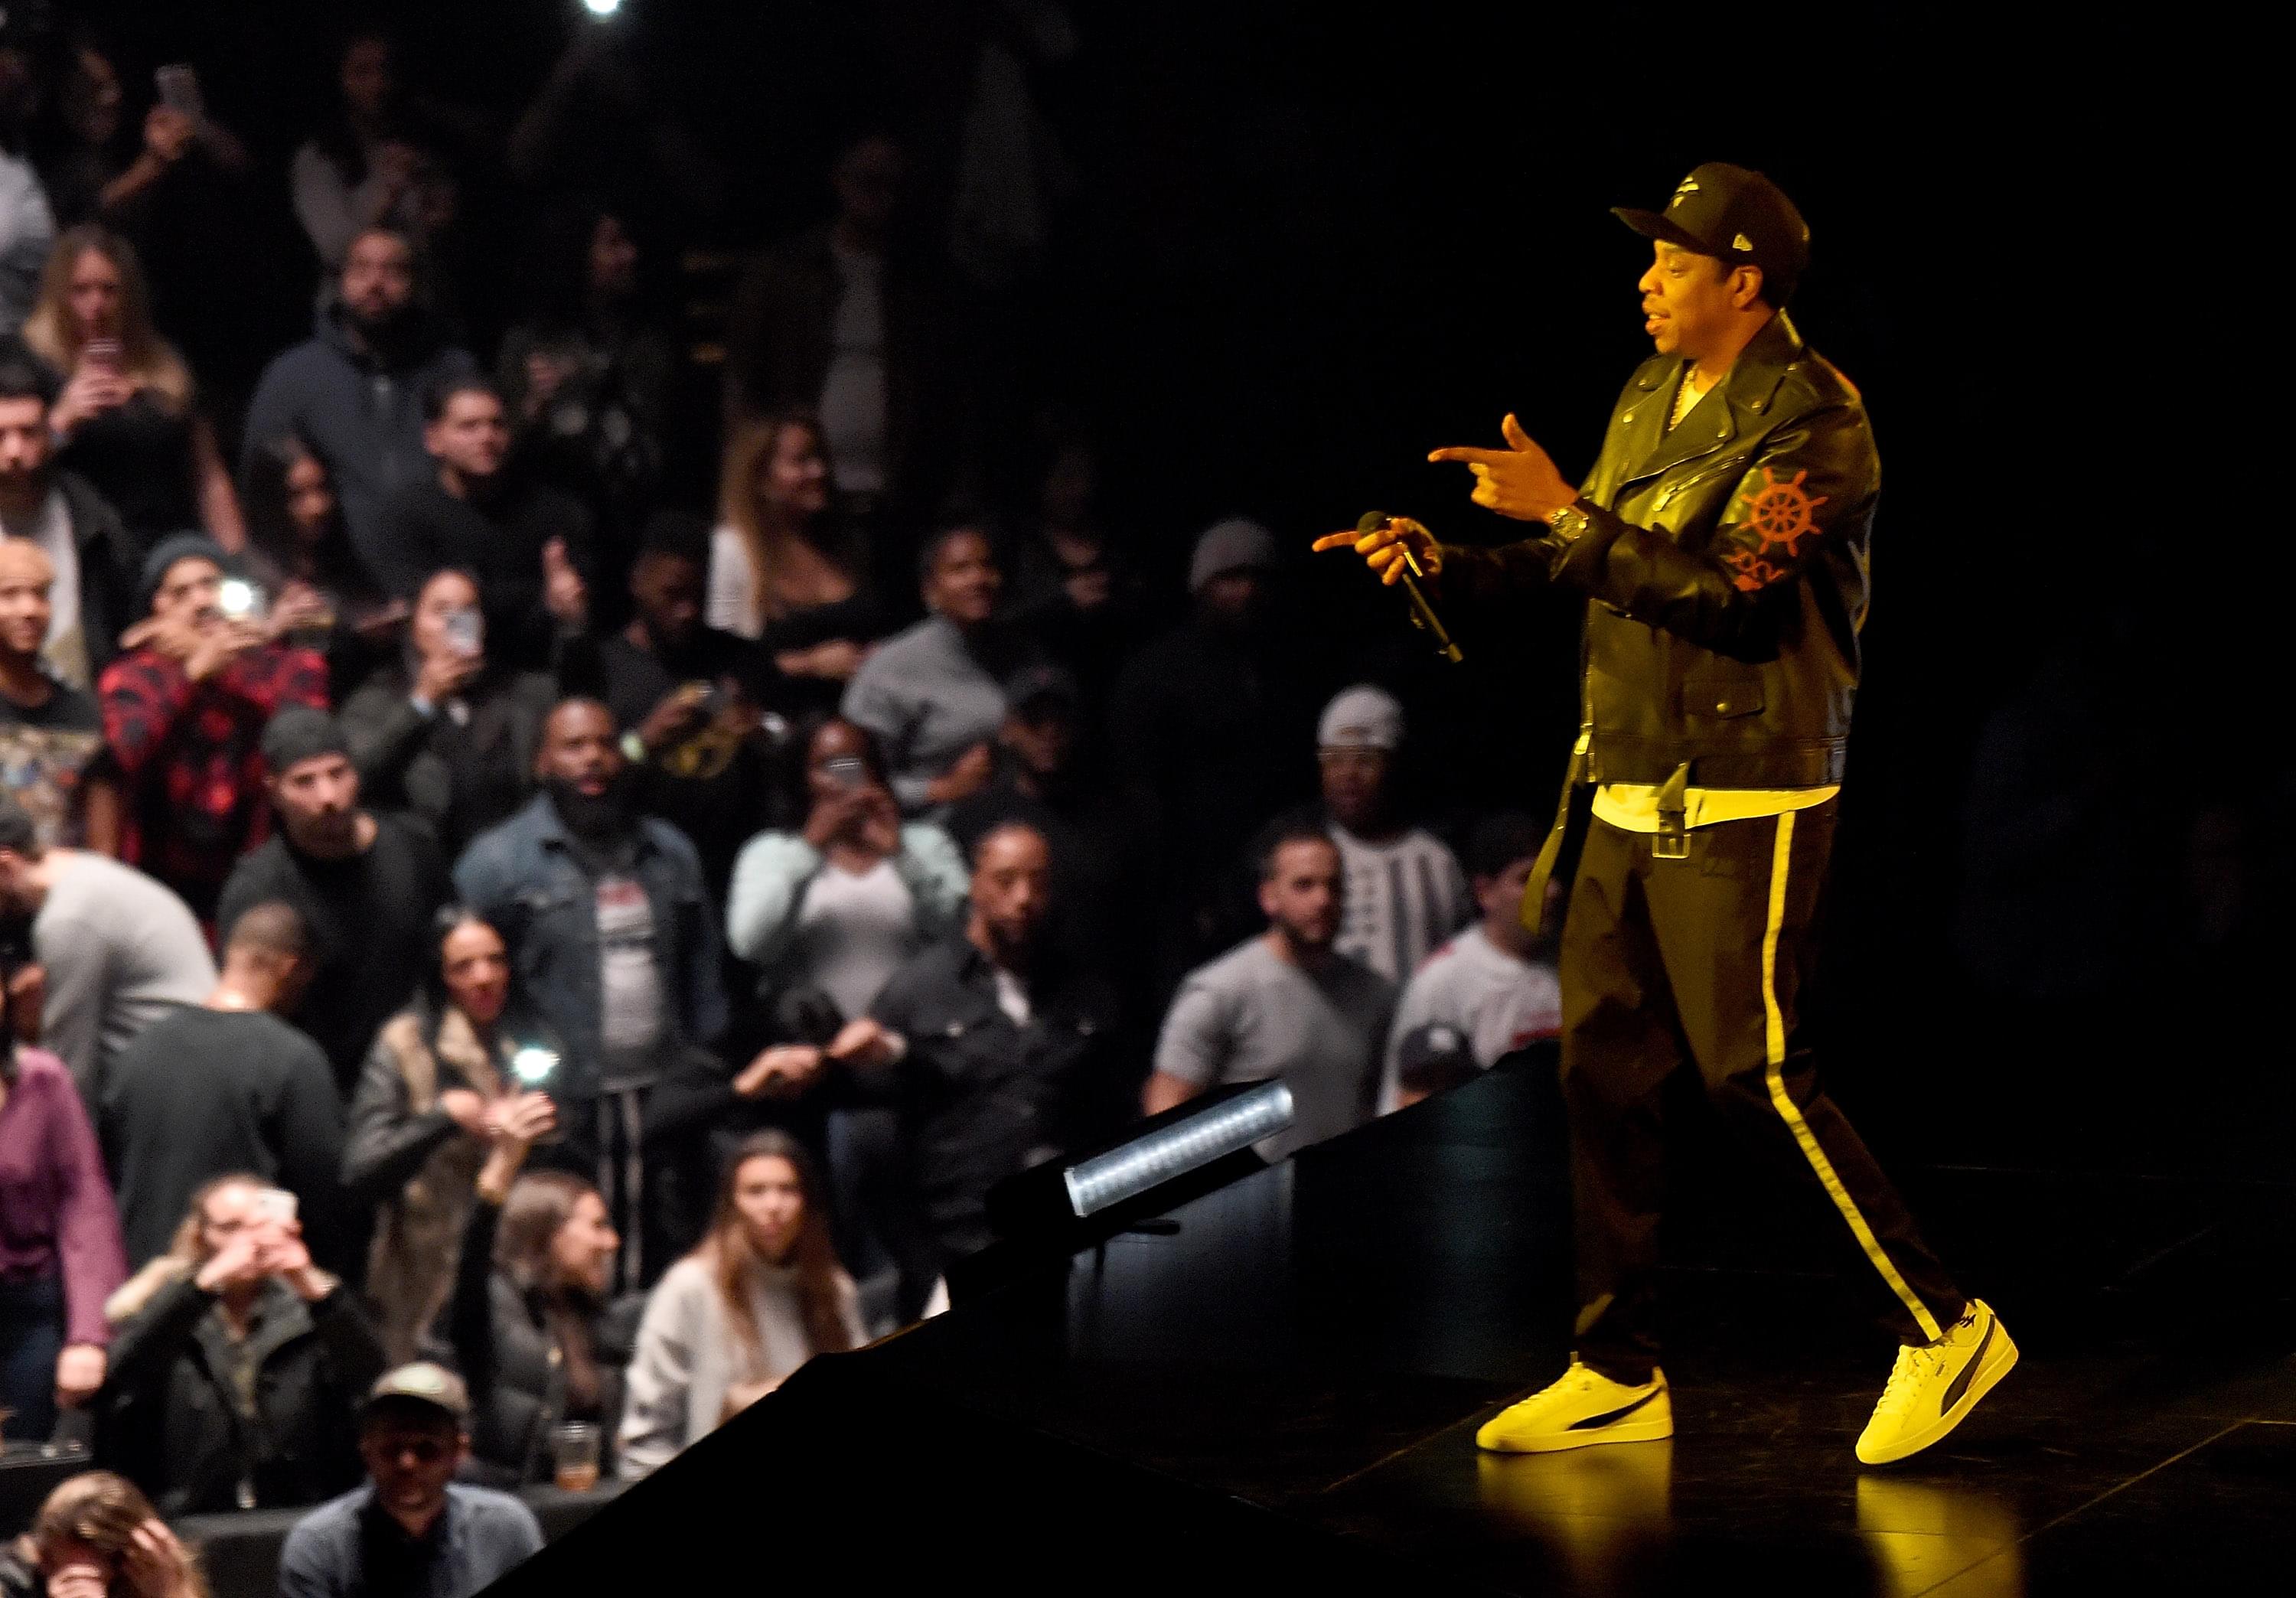 Jay Z Stops His Concert To Share A Special Moment With Cancer Survivor